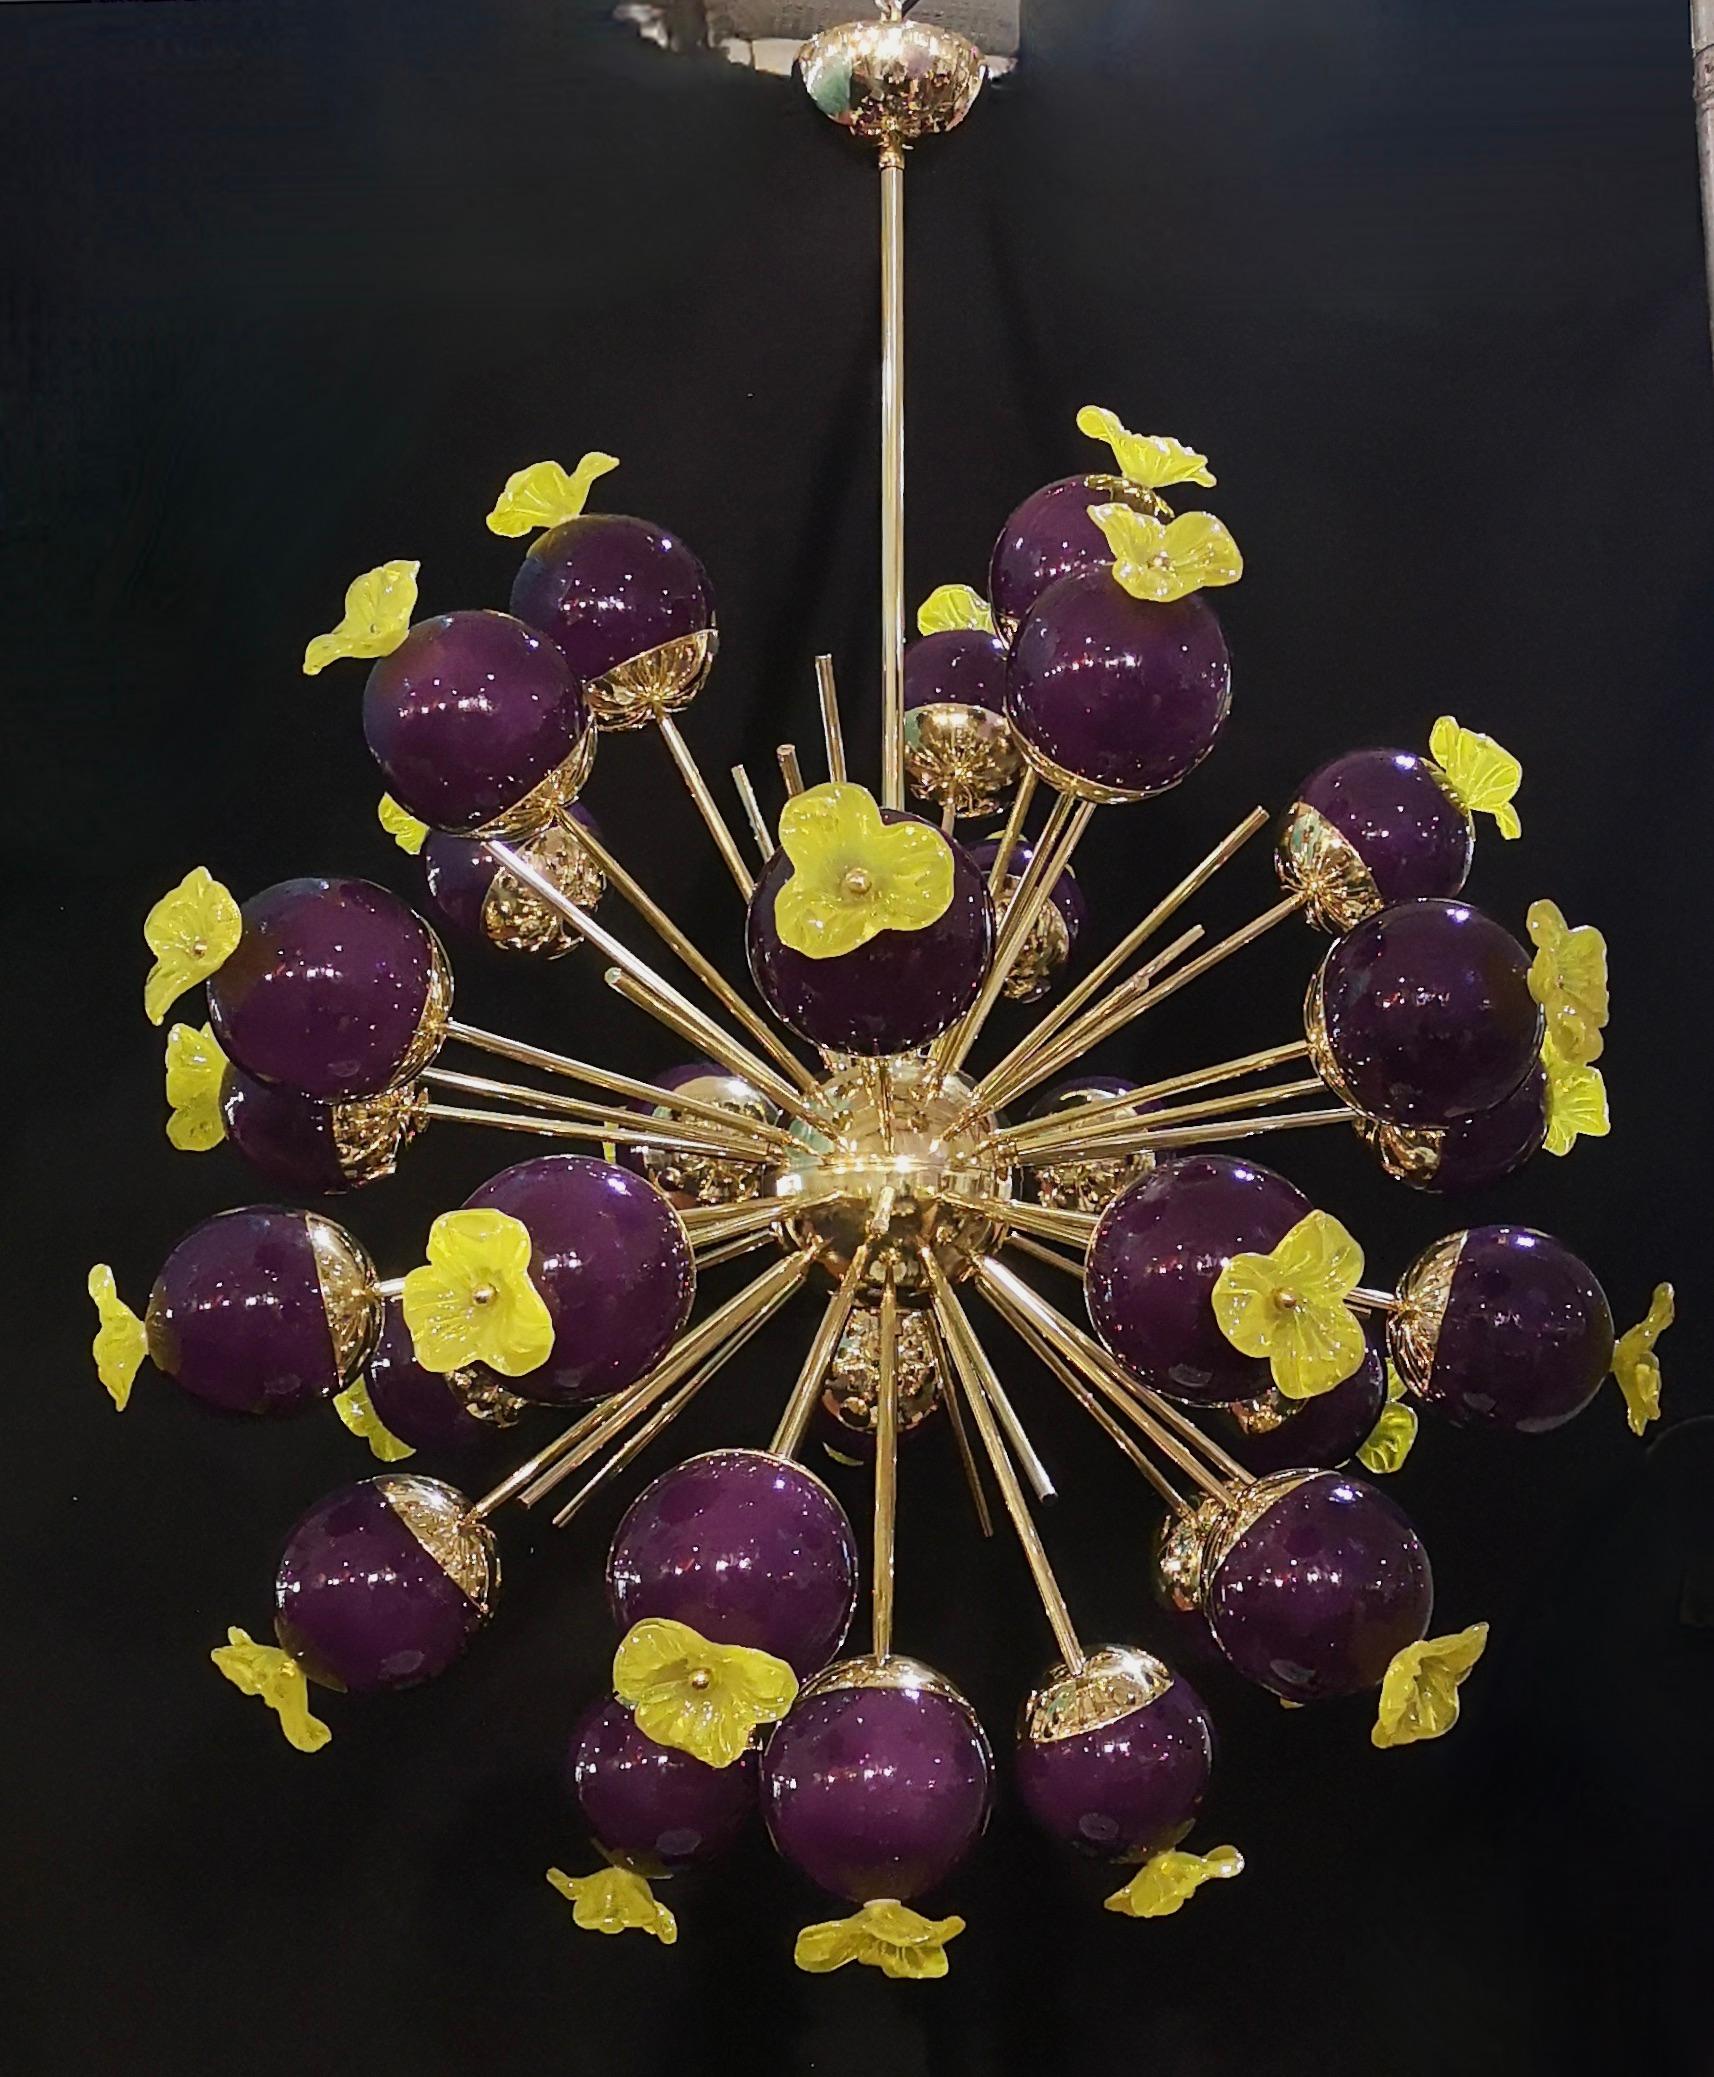 A fantastic spot of purple color, amazing design due to its very particular shape of these purple glass spheres and for the yellow flower always in Murano glass. Very elegant, will furnish and decorate your whole room.

Structure completely in brass